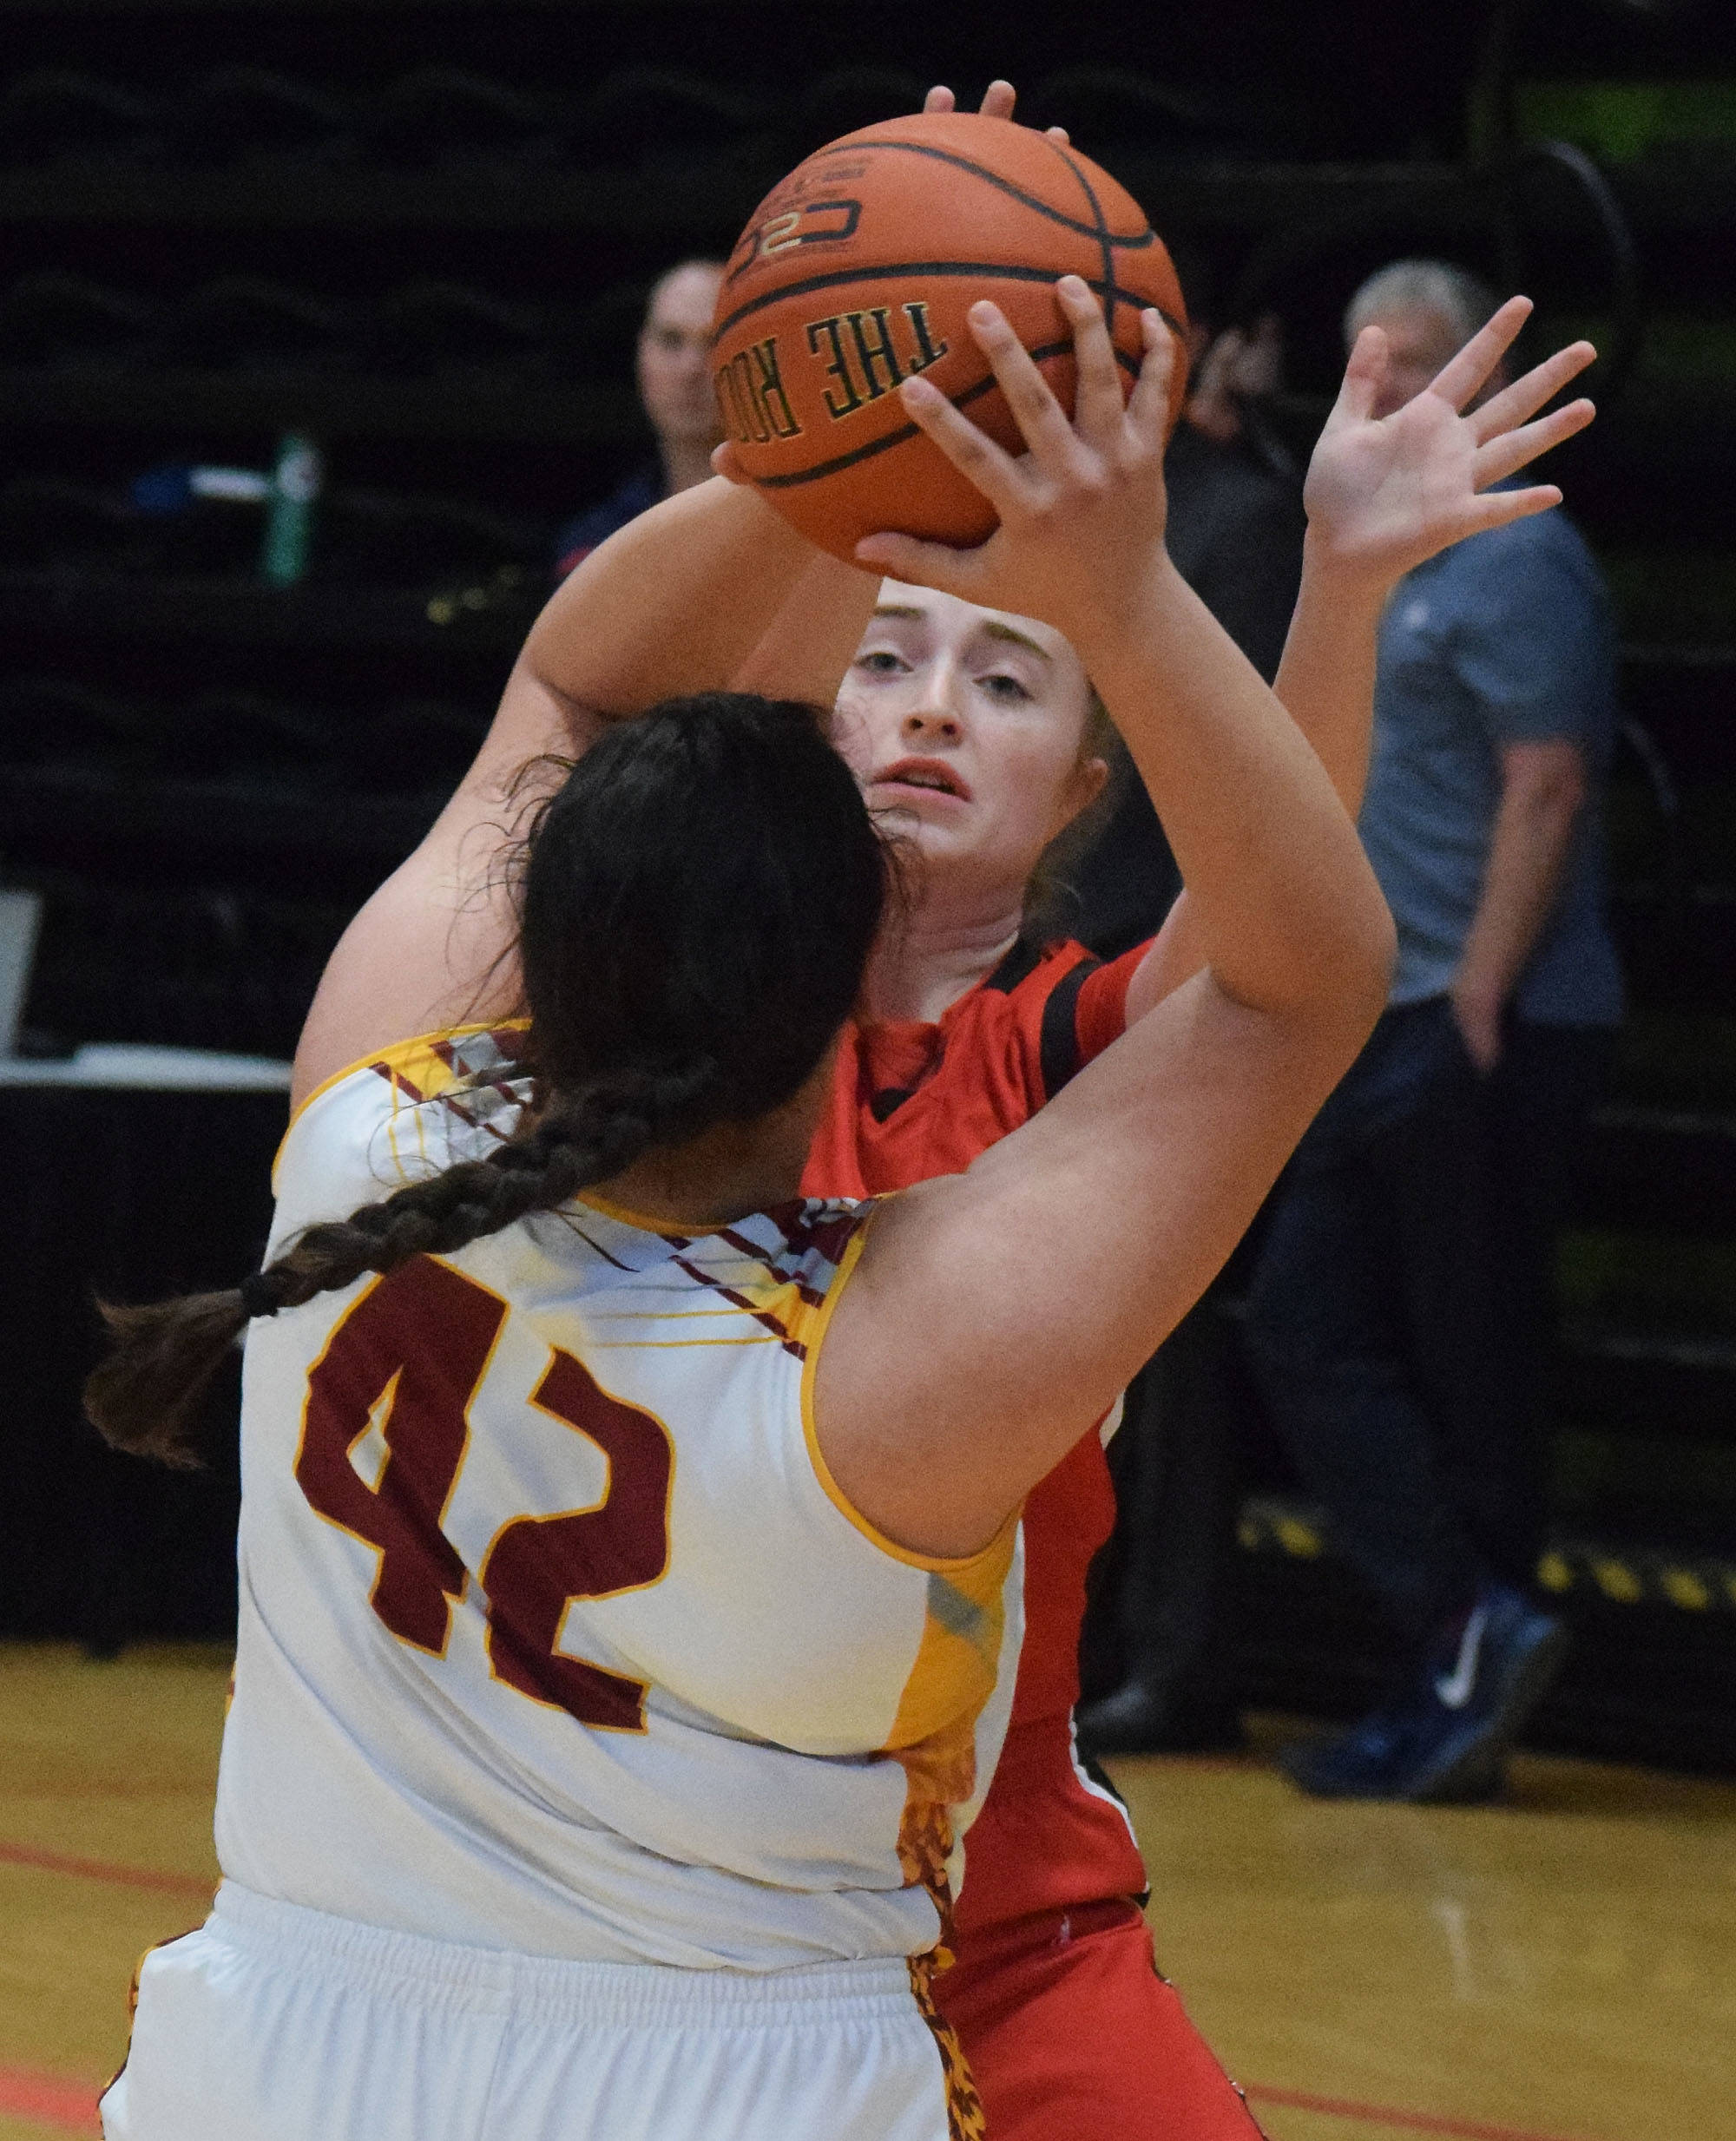 Kenai’s Liz Hanson guards Mt. Edgecumbe’s Maggie Miller (42) Thursday, Mar. 21, 2019, at the Class 3A state championship tournament at the Alaska Airlines Center in Anchorage. (Photo by Joey Klecka/Peninsula Clarion)